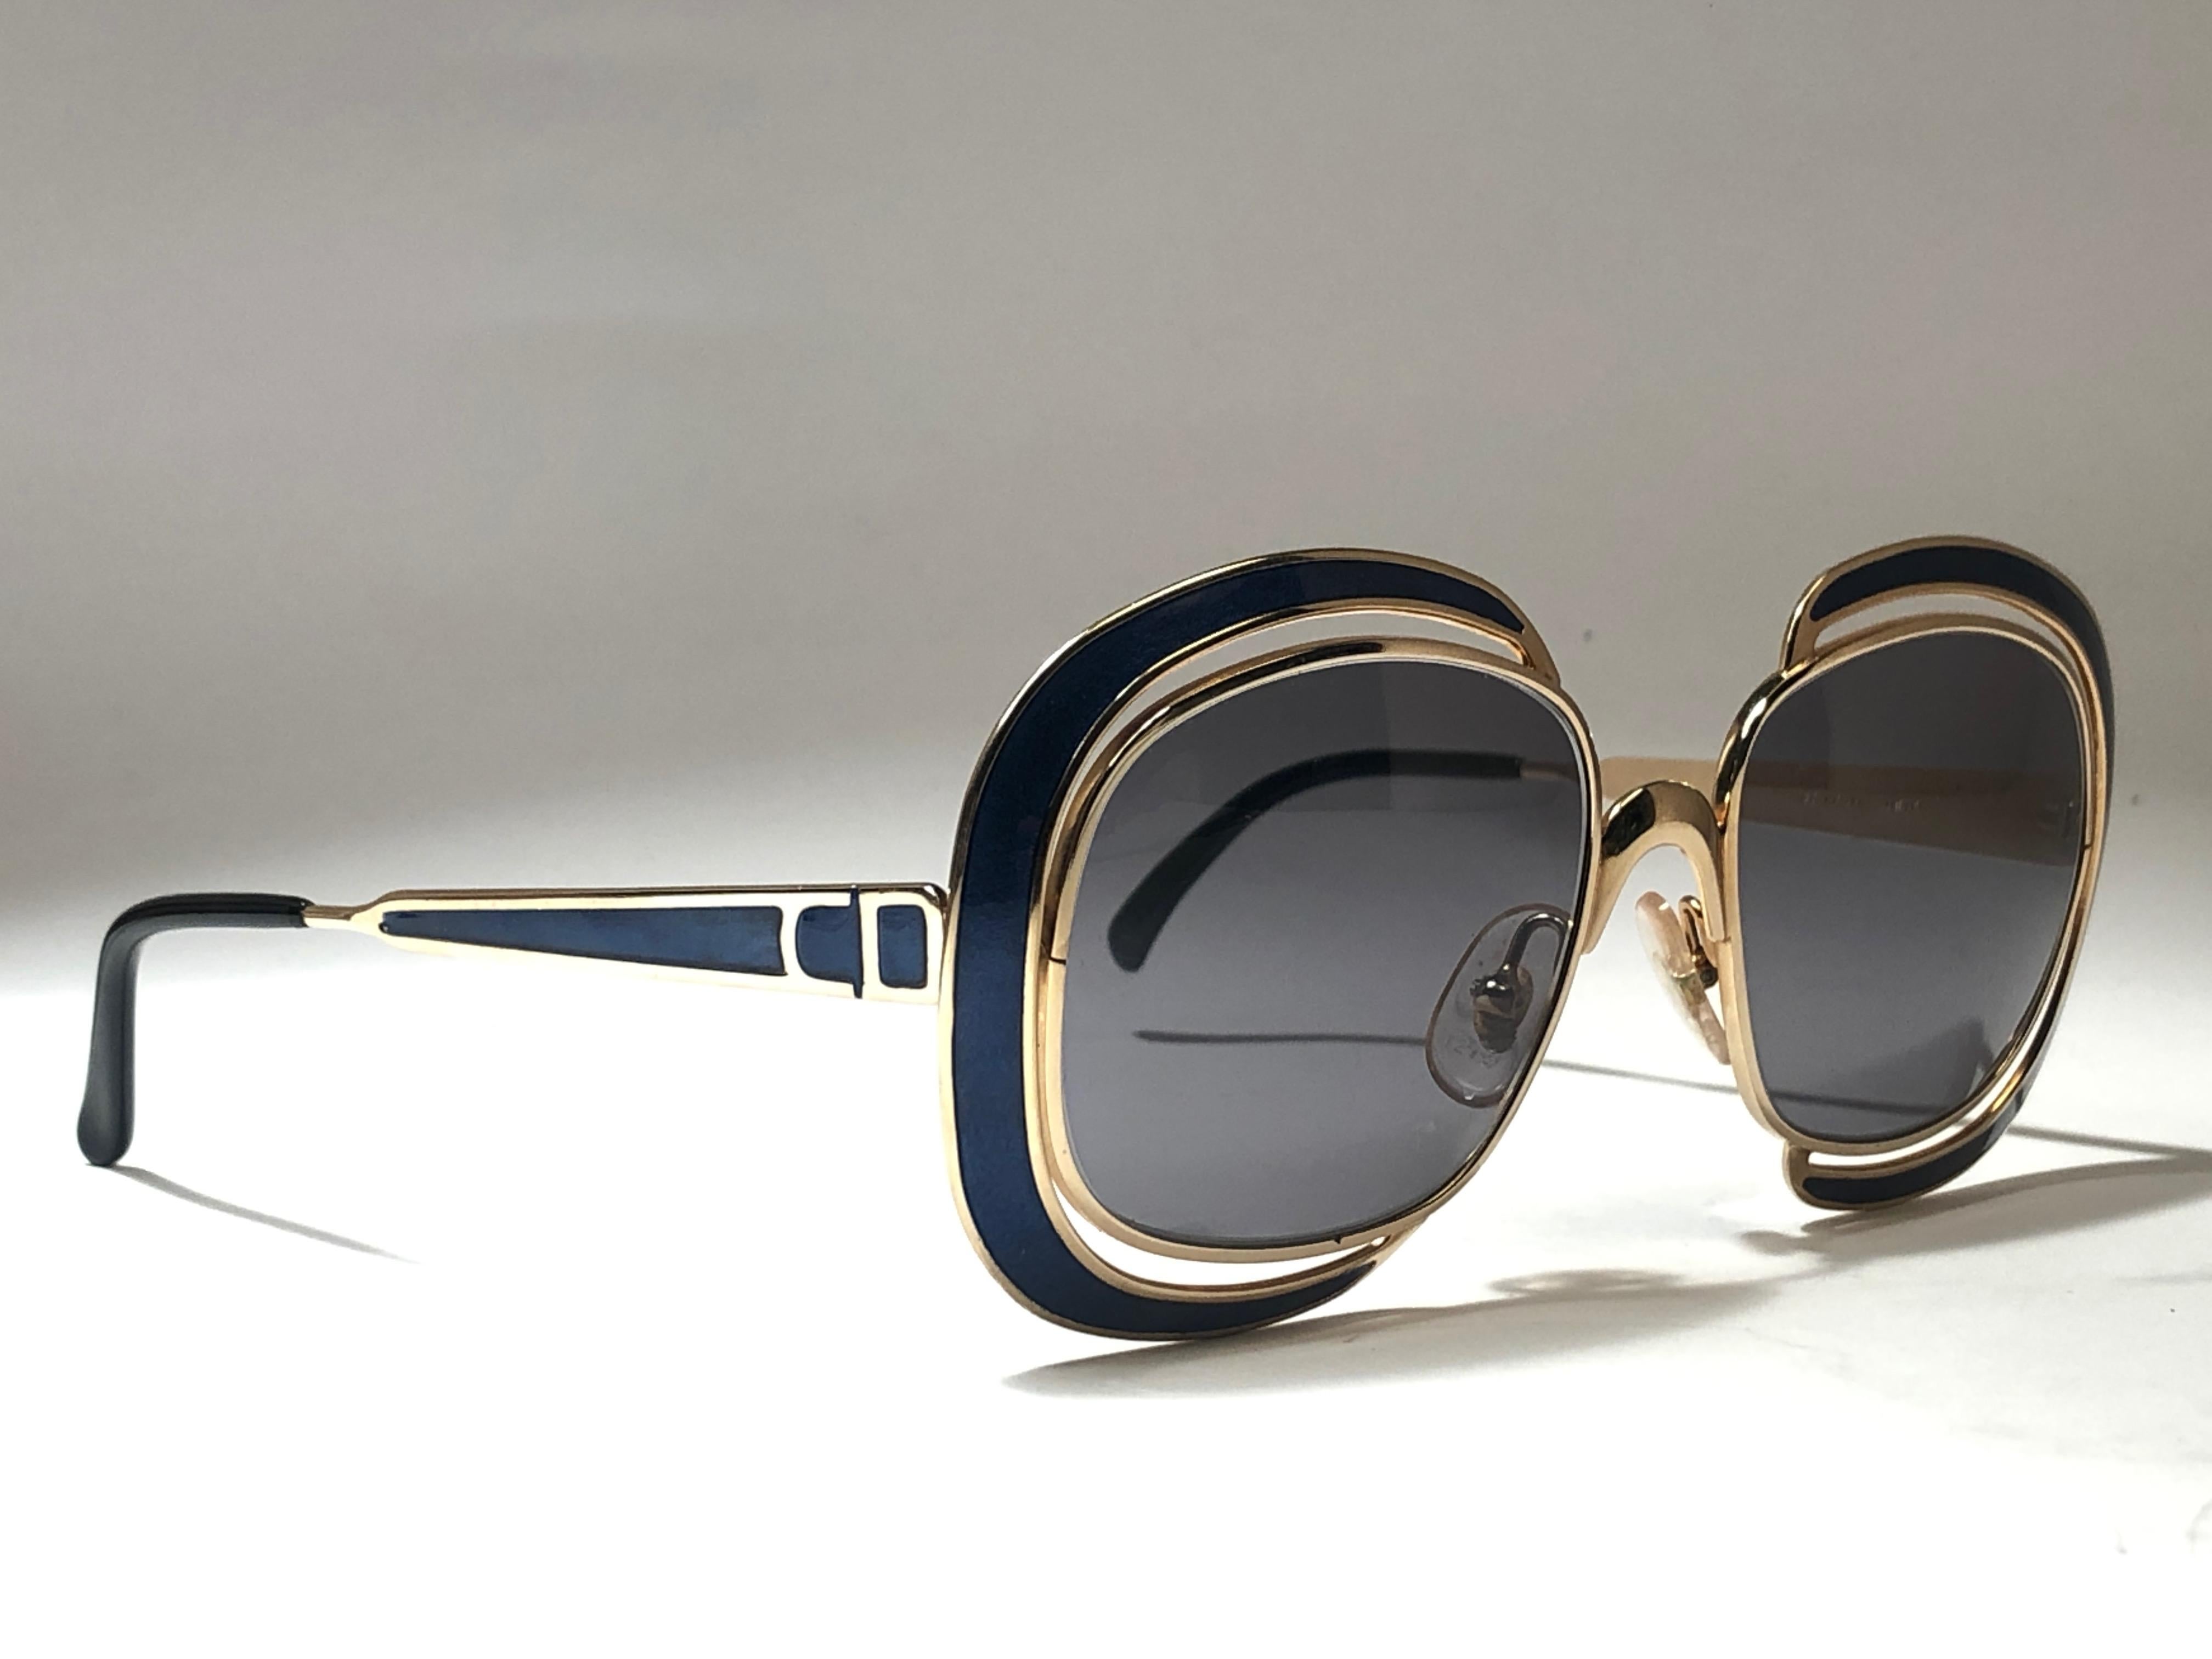 New vintage Christian Dior sunglasses. Blue enamel details over a gold frame.

Grey lenses.

Comes with it original CD sleeve.

New, never worn or displayed this item may show light sign of wear due to storage.

Made in Austria
